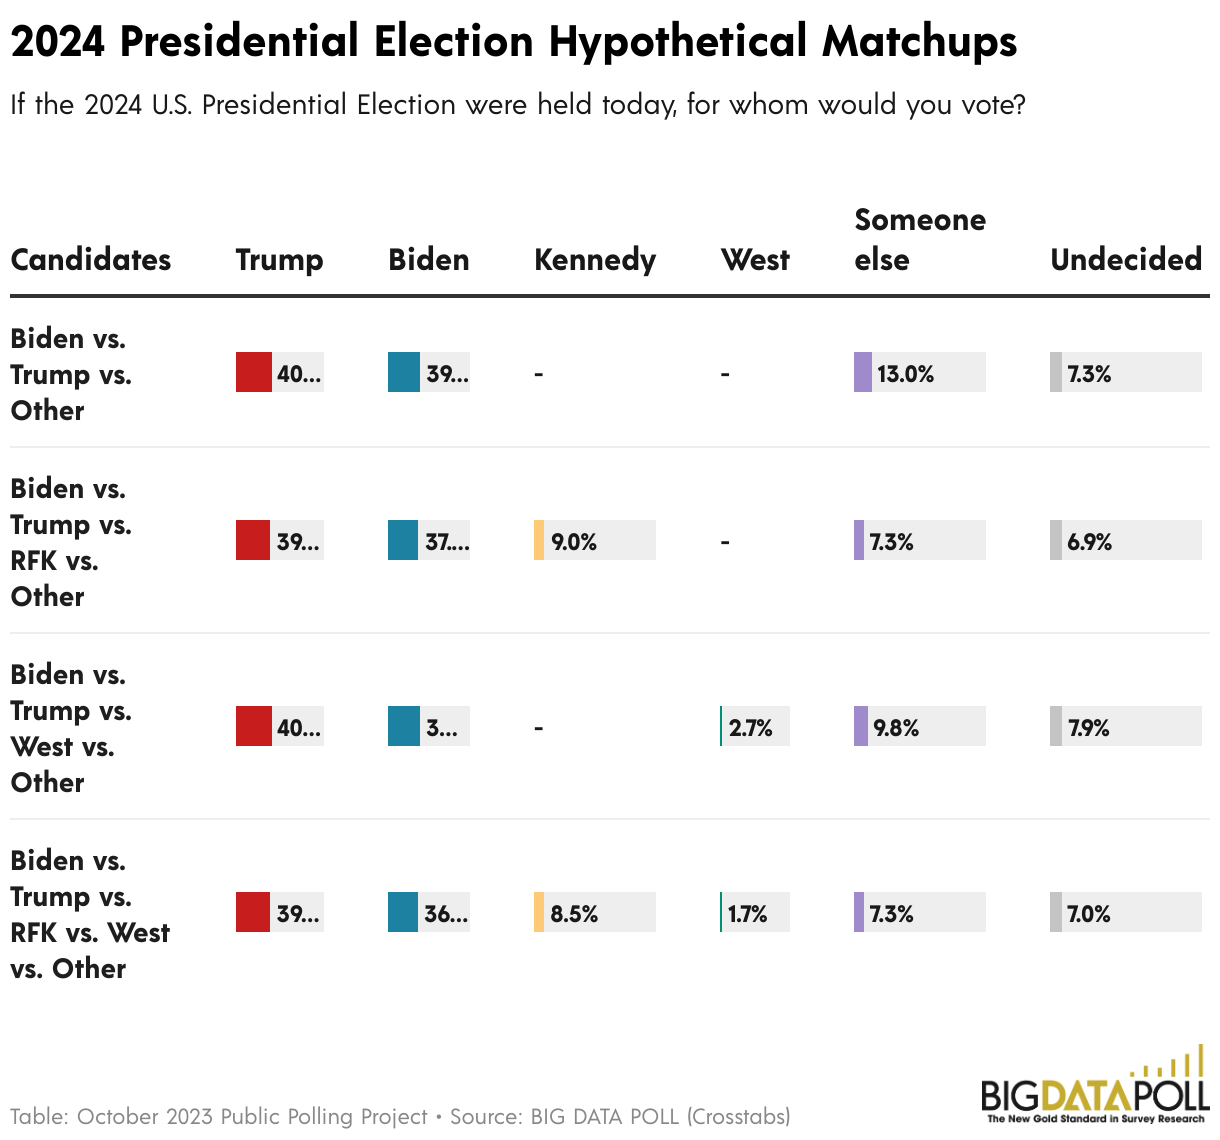 October 2023 National Poll Impact of RFK, West on 2024 Presidential